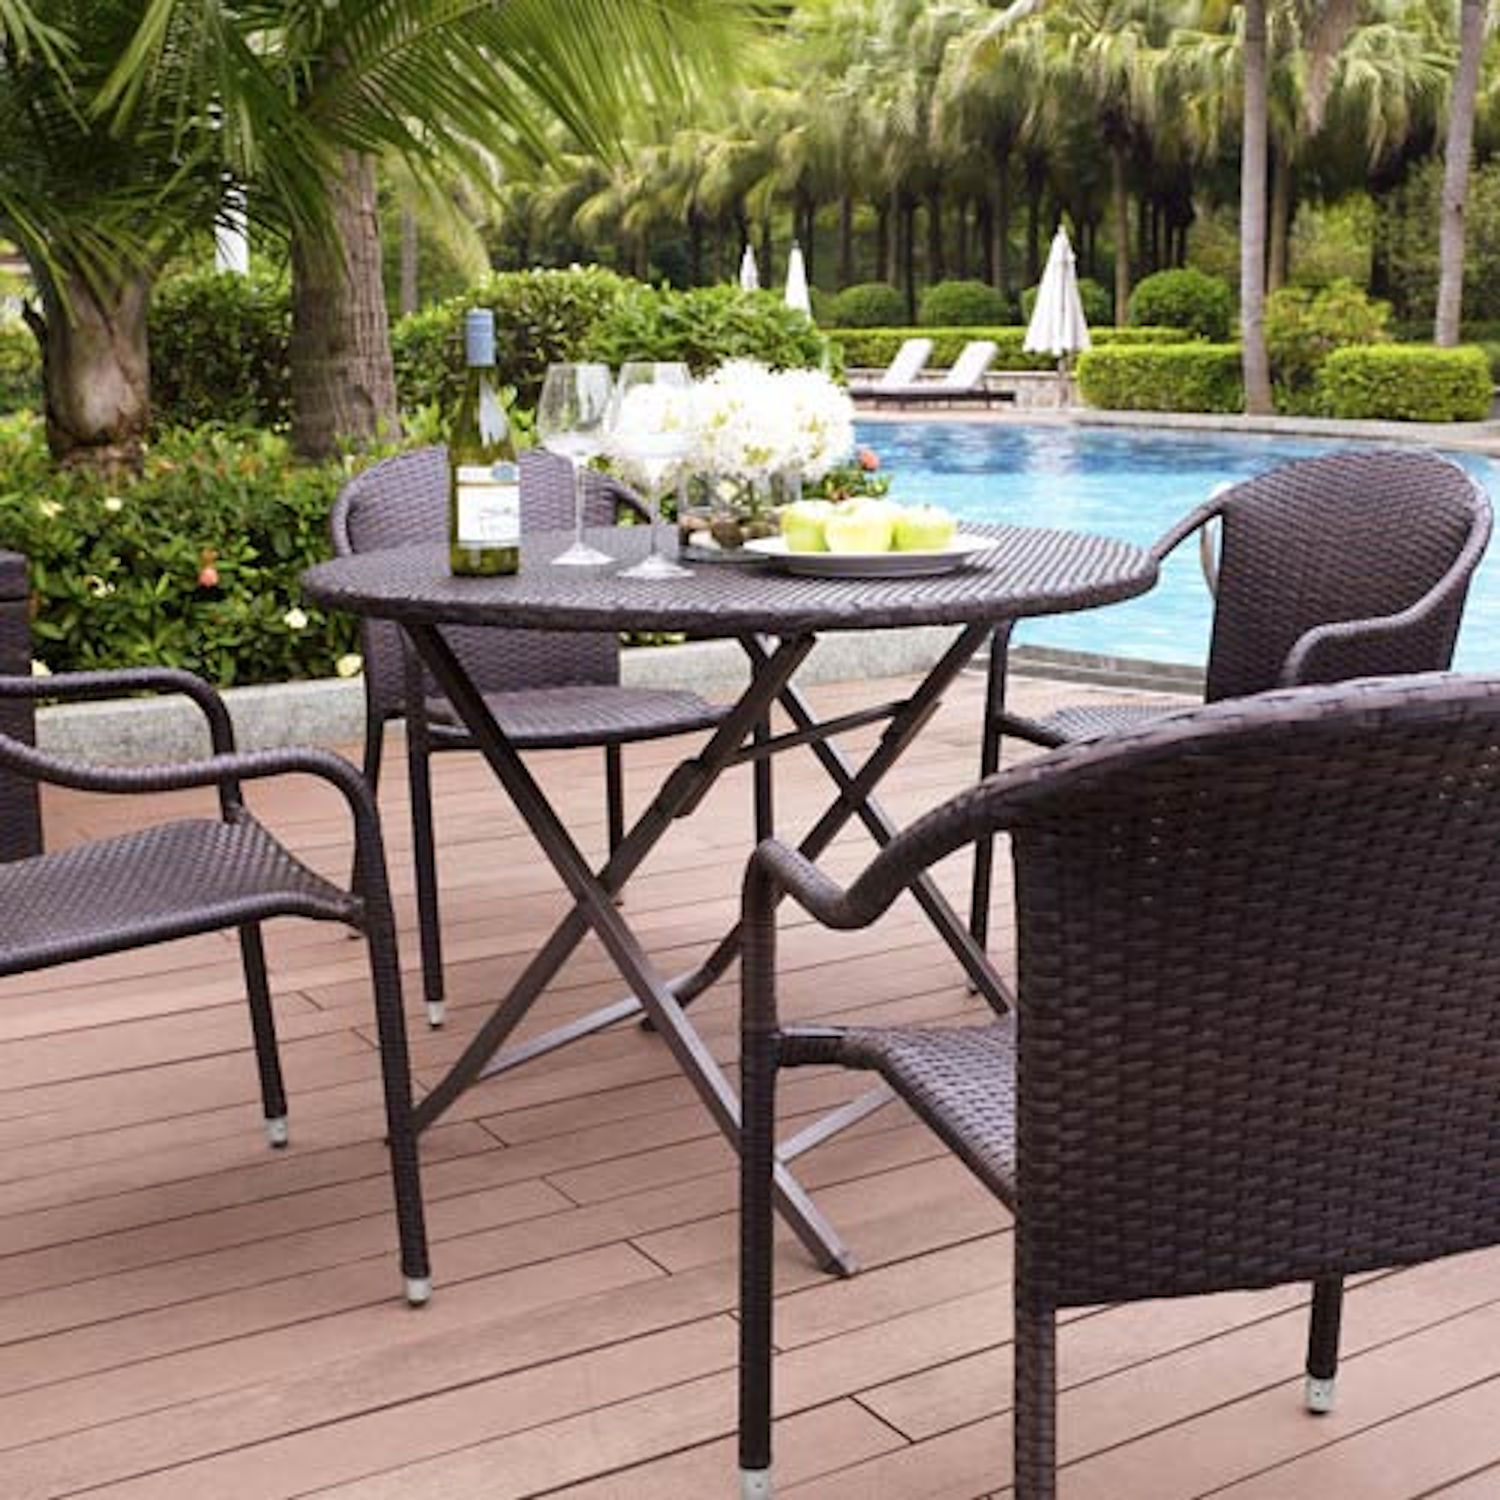 Crosley Furniture CO7109-WH Palm Harbor Outdoor Wicker Stackable Chairs Red Set of 4 